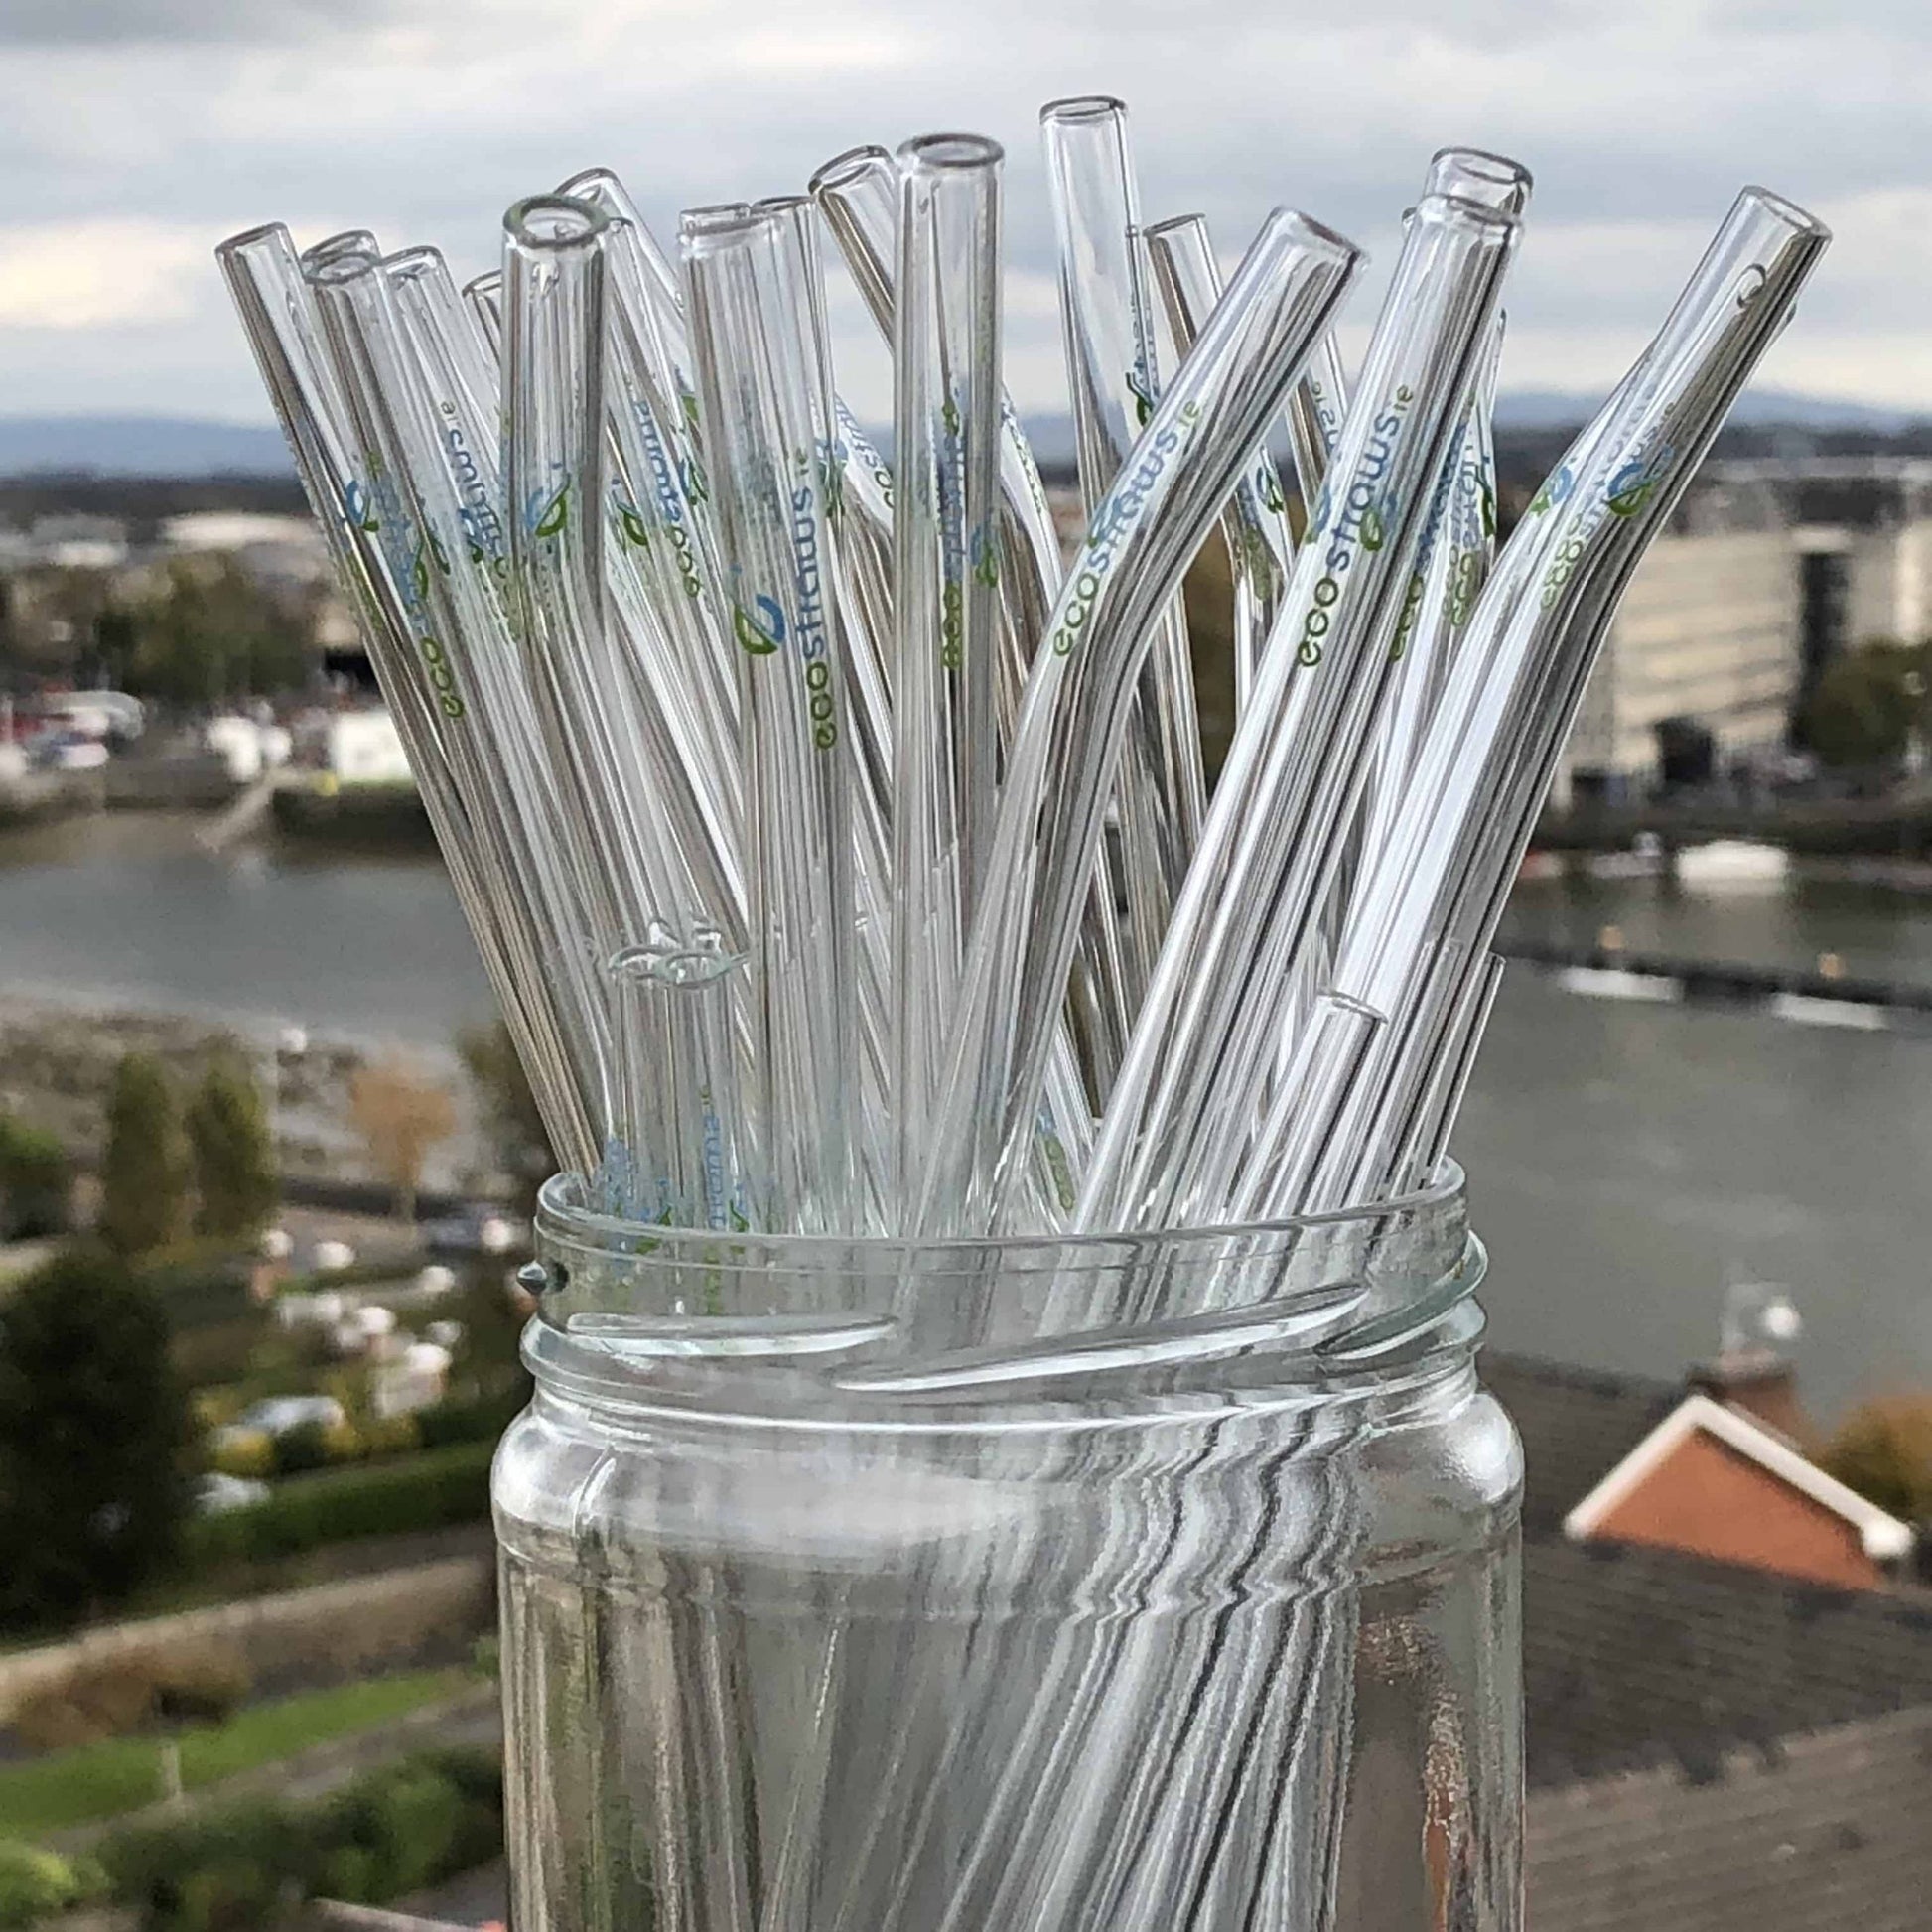 Eco-friendly and elegant reusable straw alternatives, perfect for environmentally conscious sipping